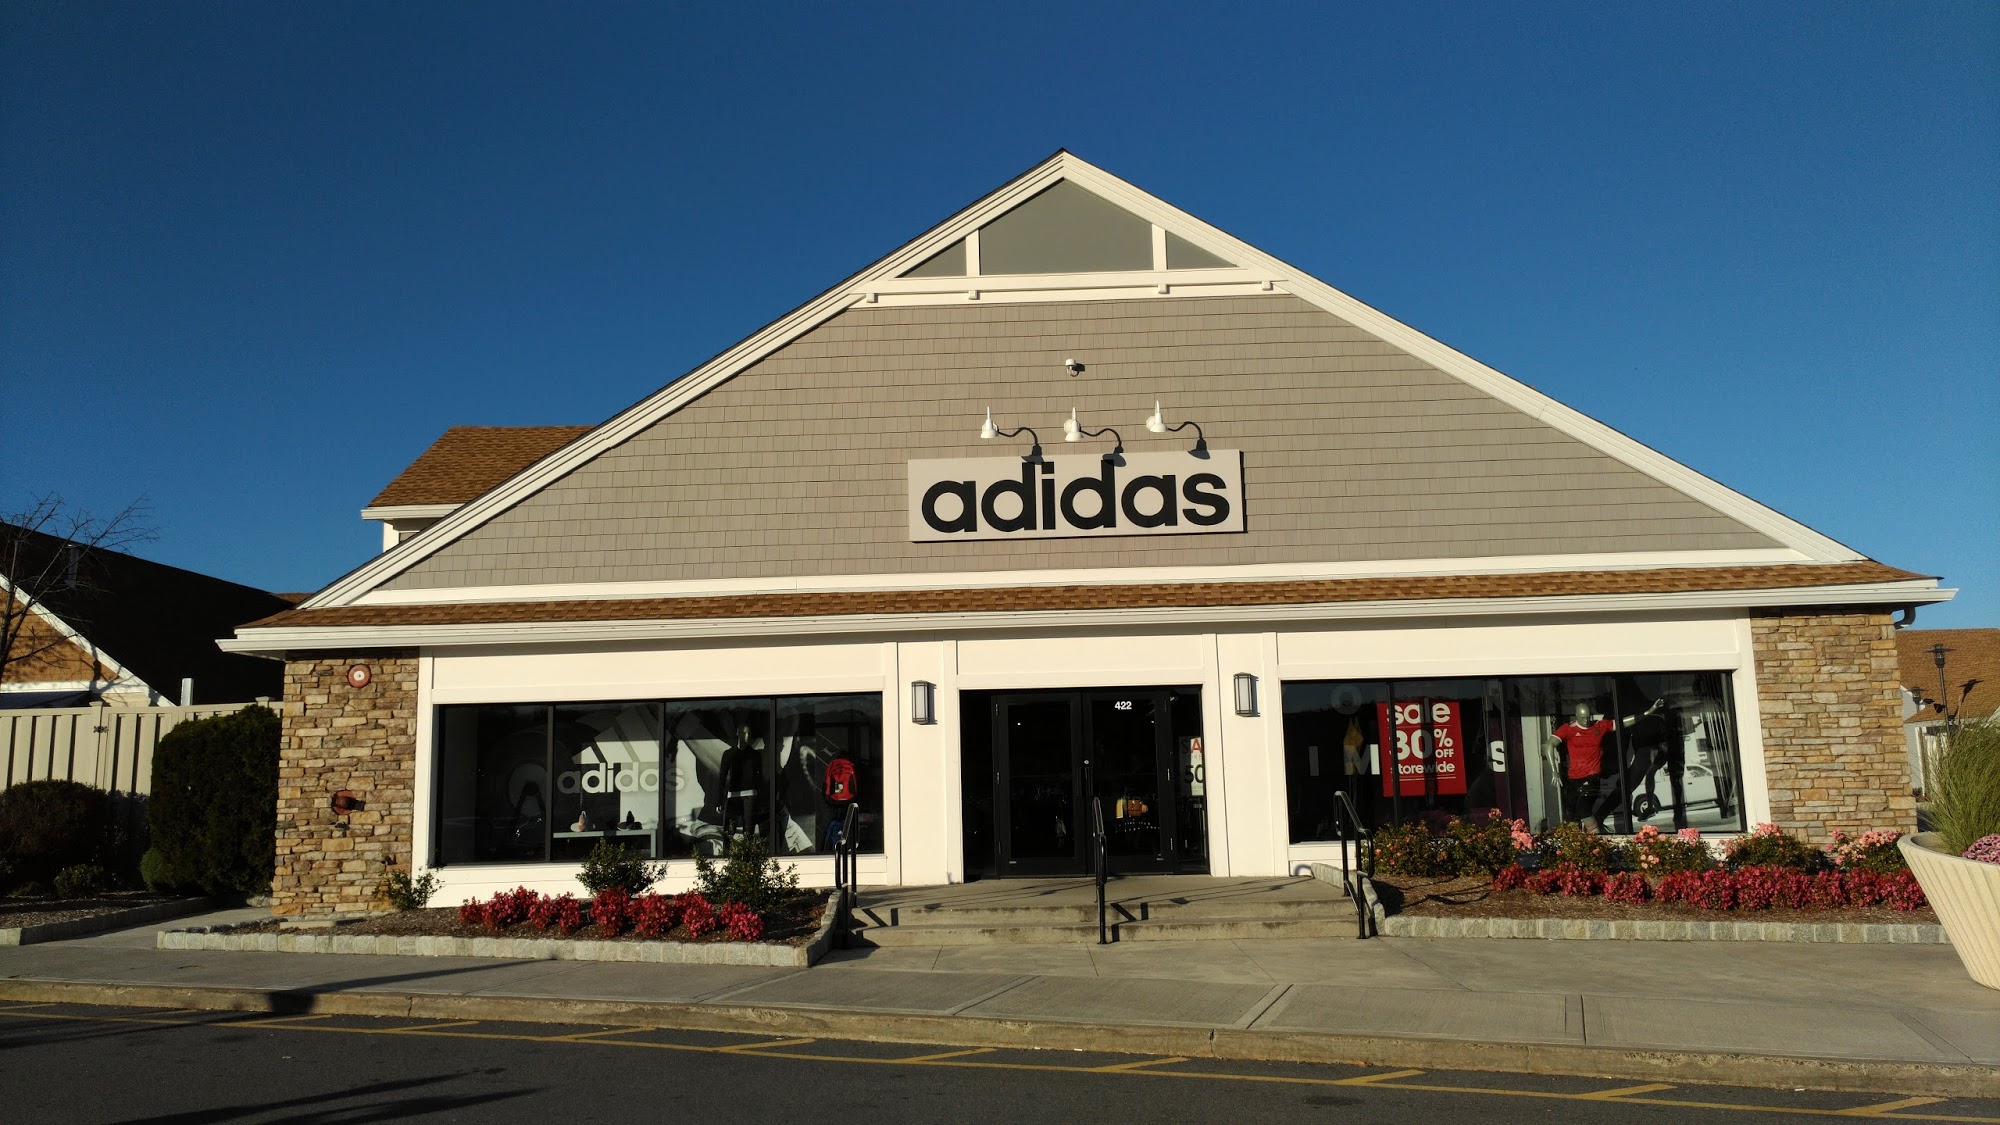 adidas Outlet Store Central Valley, Woodbury Commons Premium Outlets